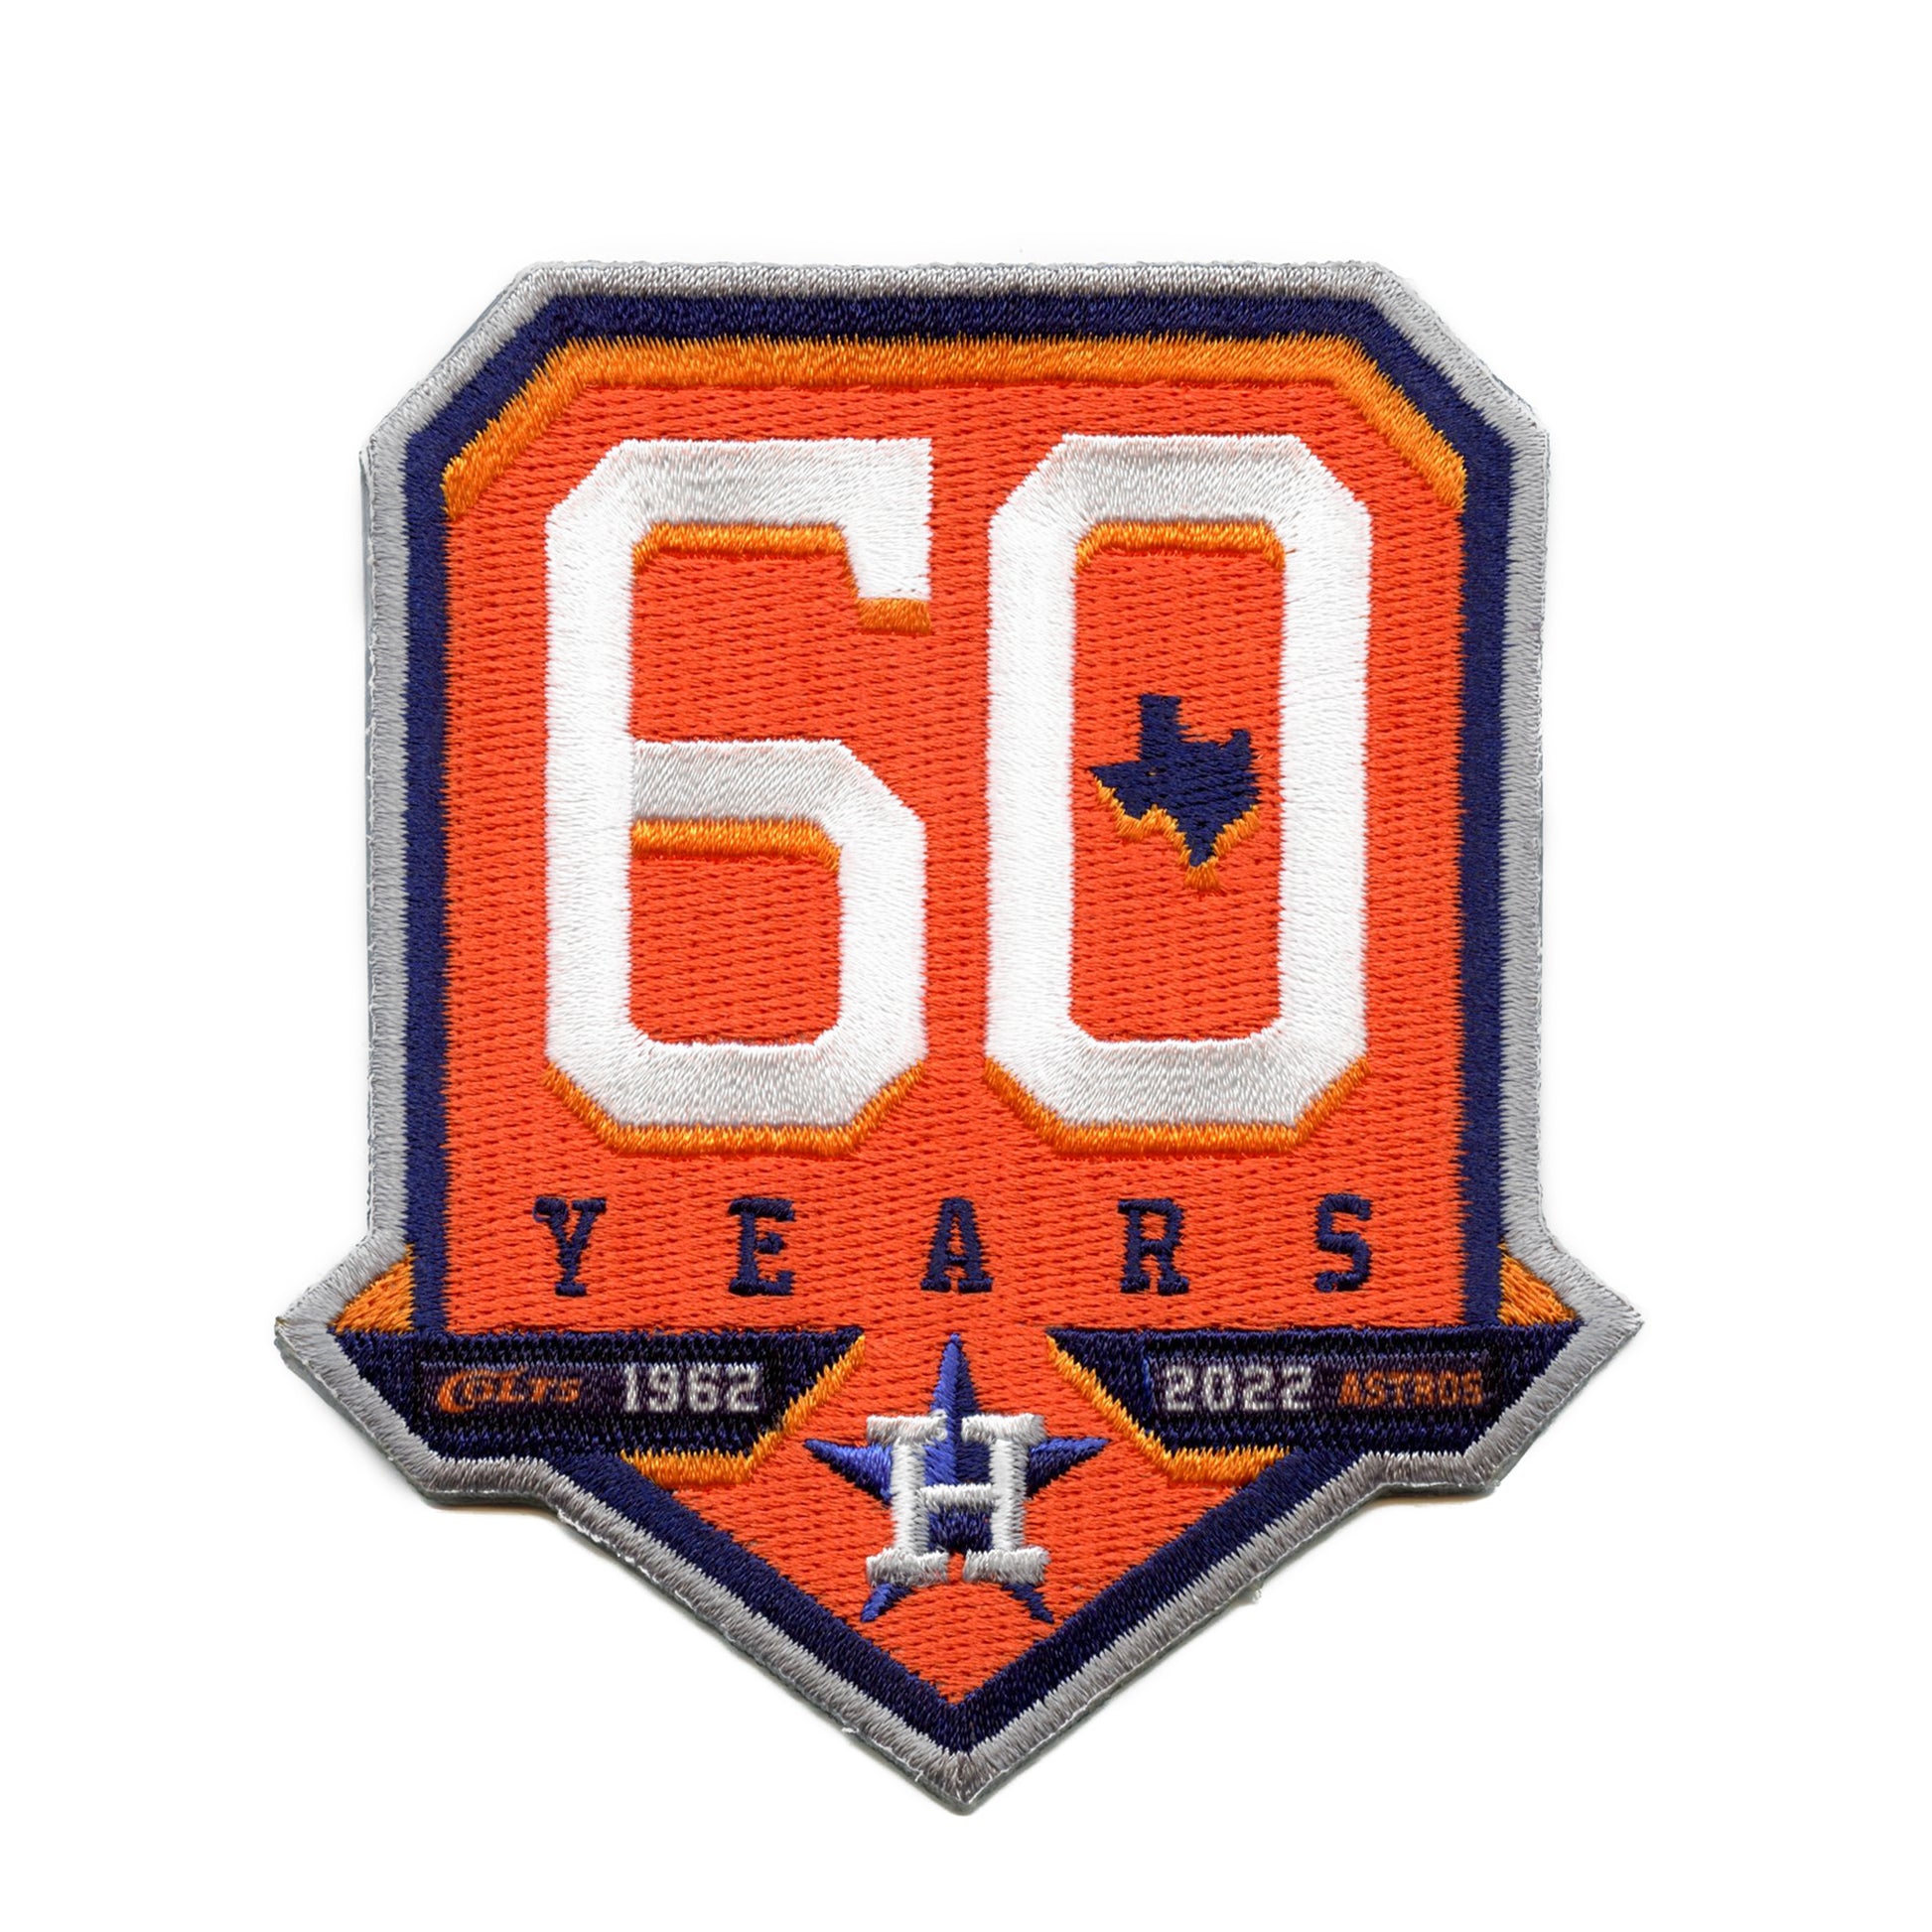 Houston Astros Players 60 Years 1962-2022 Signatures shirt, hoodie